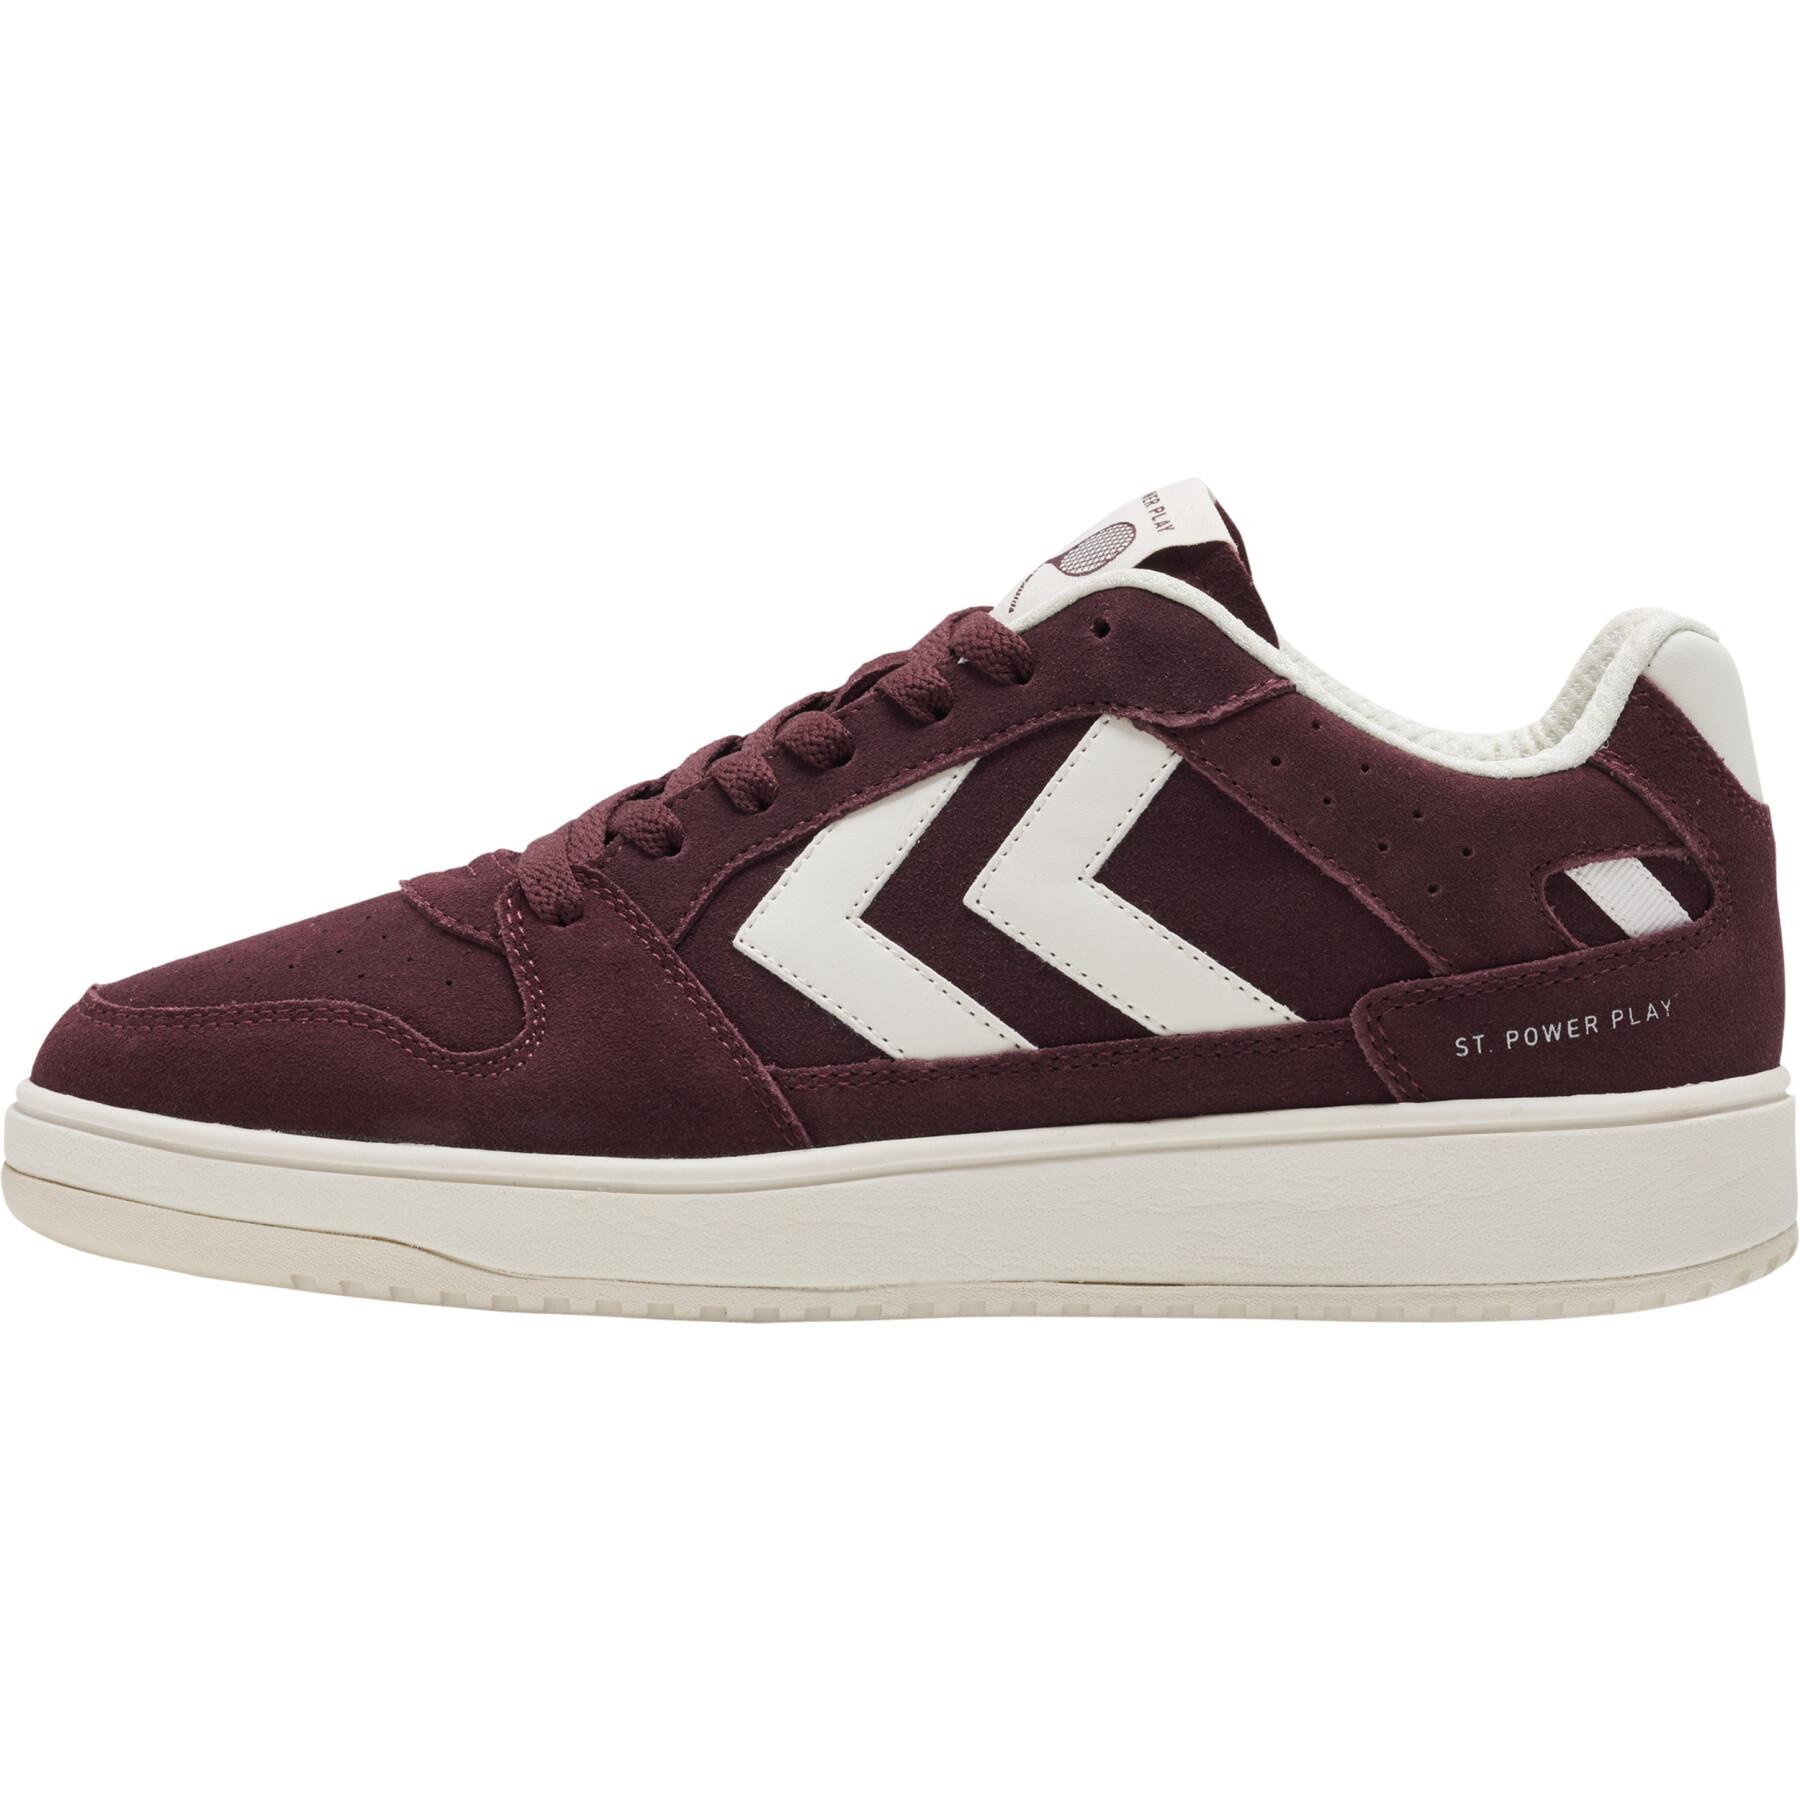 Sneakers Hummel St. Power Brands Lifestyle Hummel - - - Play Suede